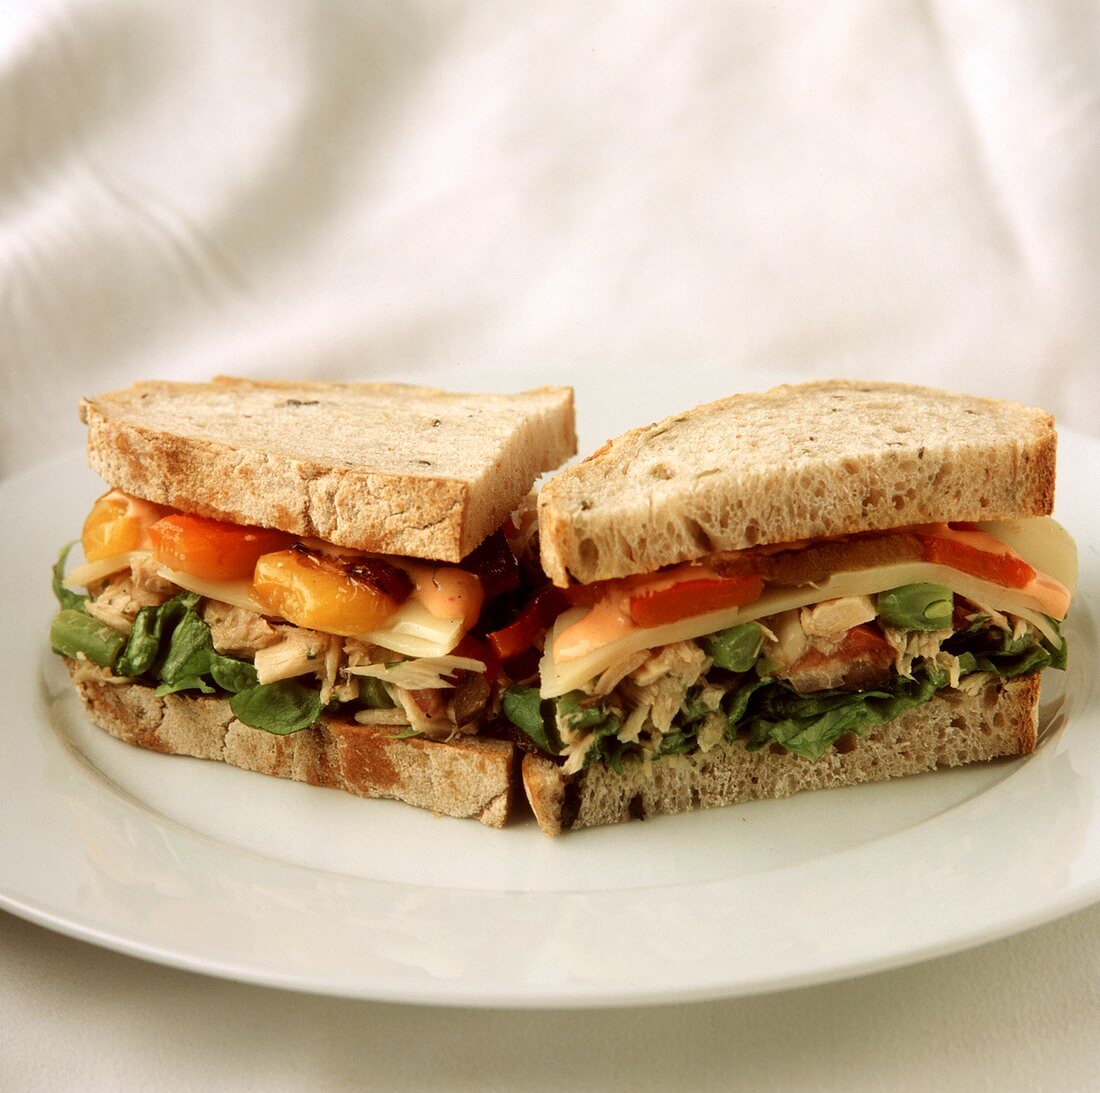 Chicken Sandwich with Cheese and Roasted Vegetables